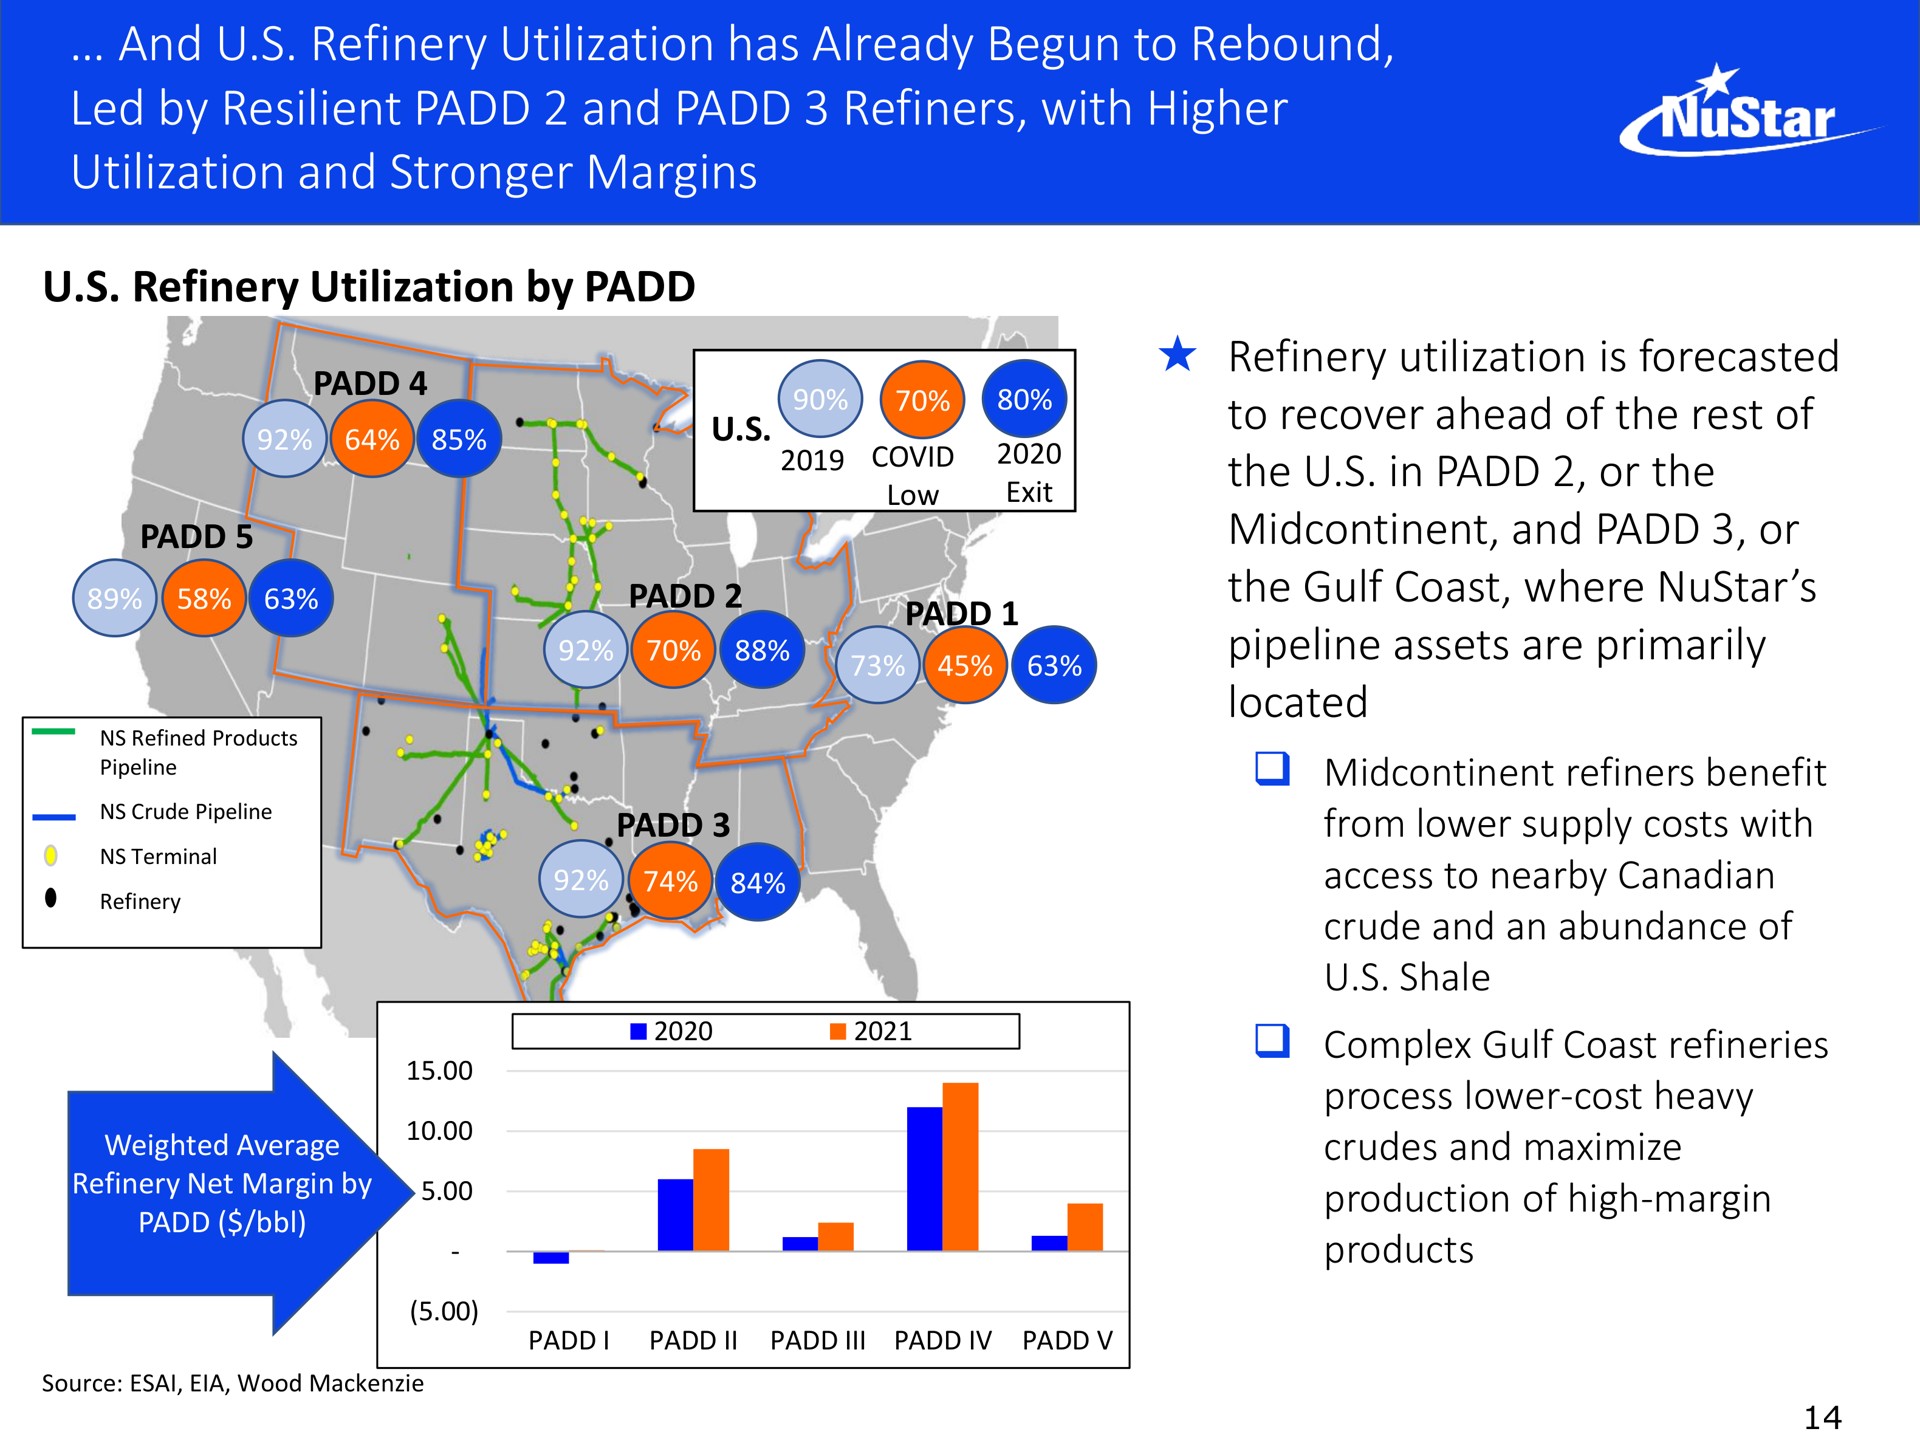 and refinery utilization has already begun to rebound led by resilient and refiners with higher utilization and margins | NuStar Energy